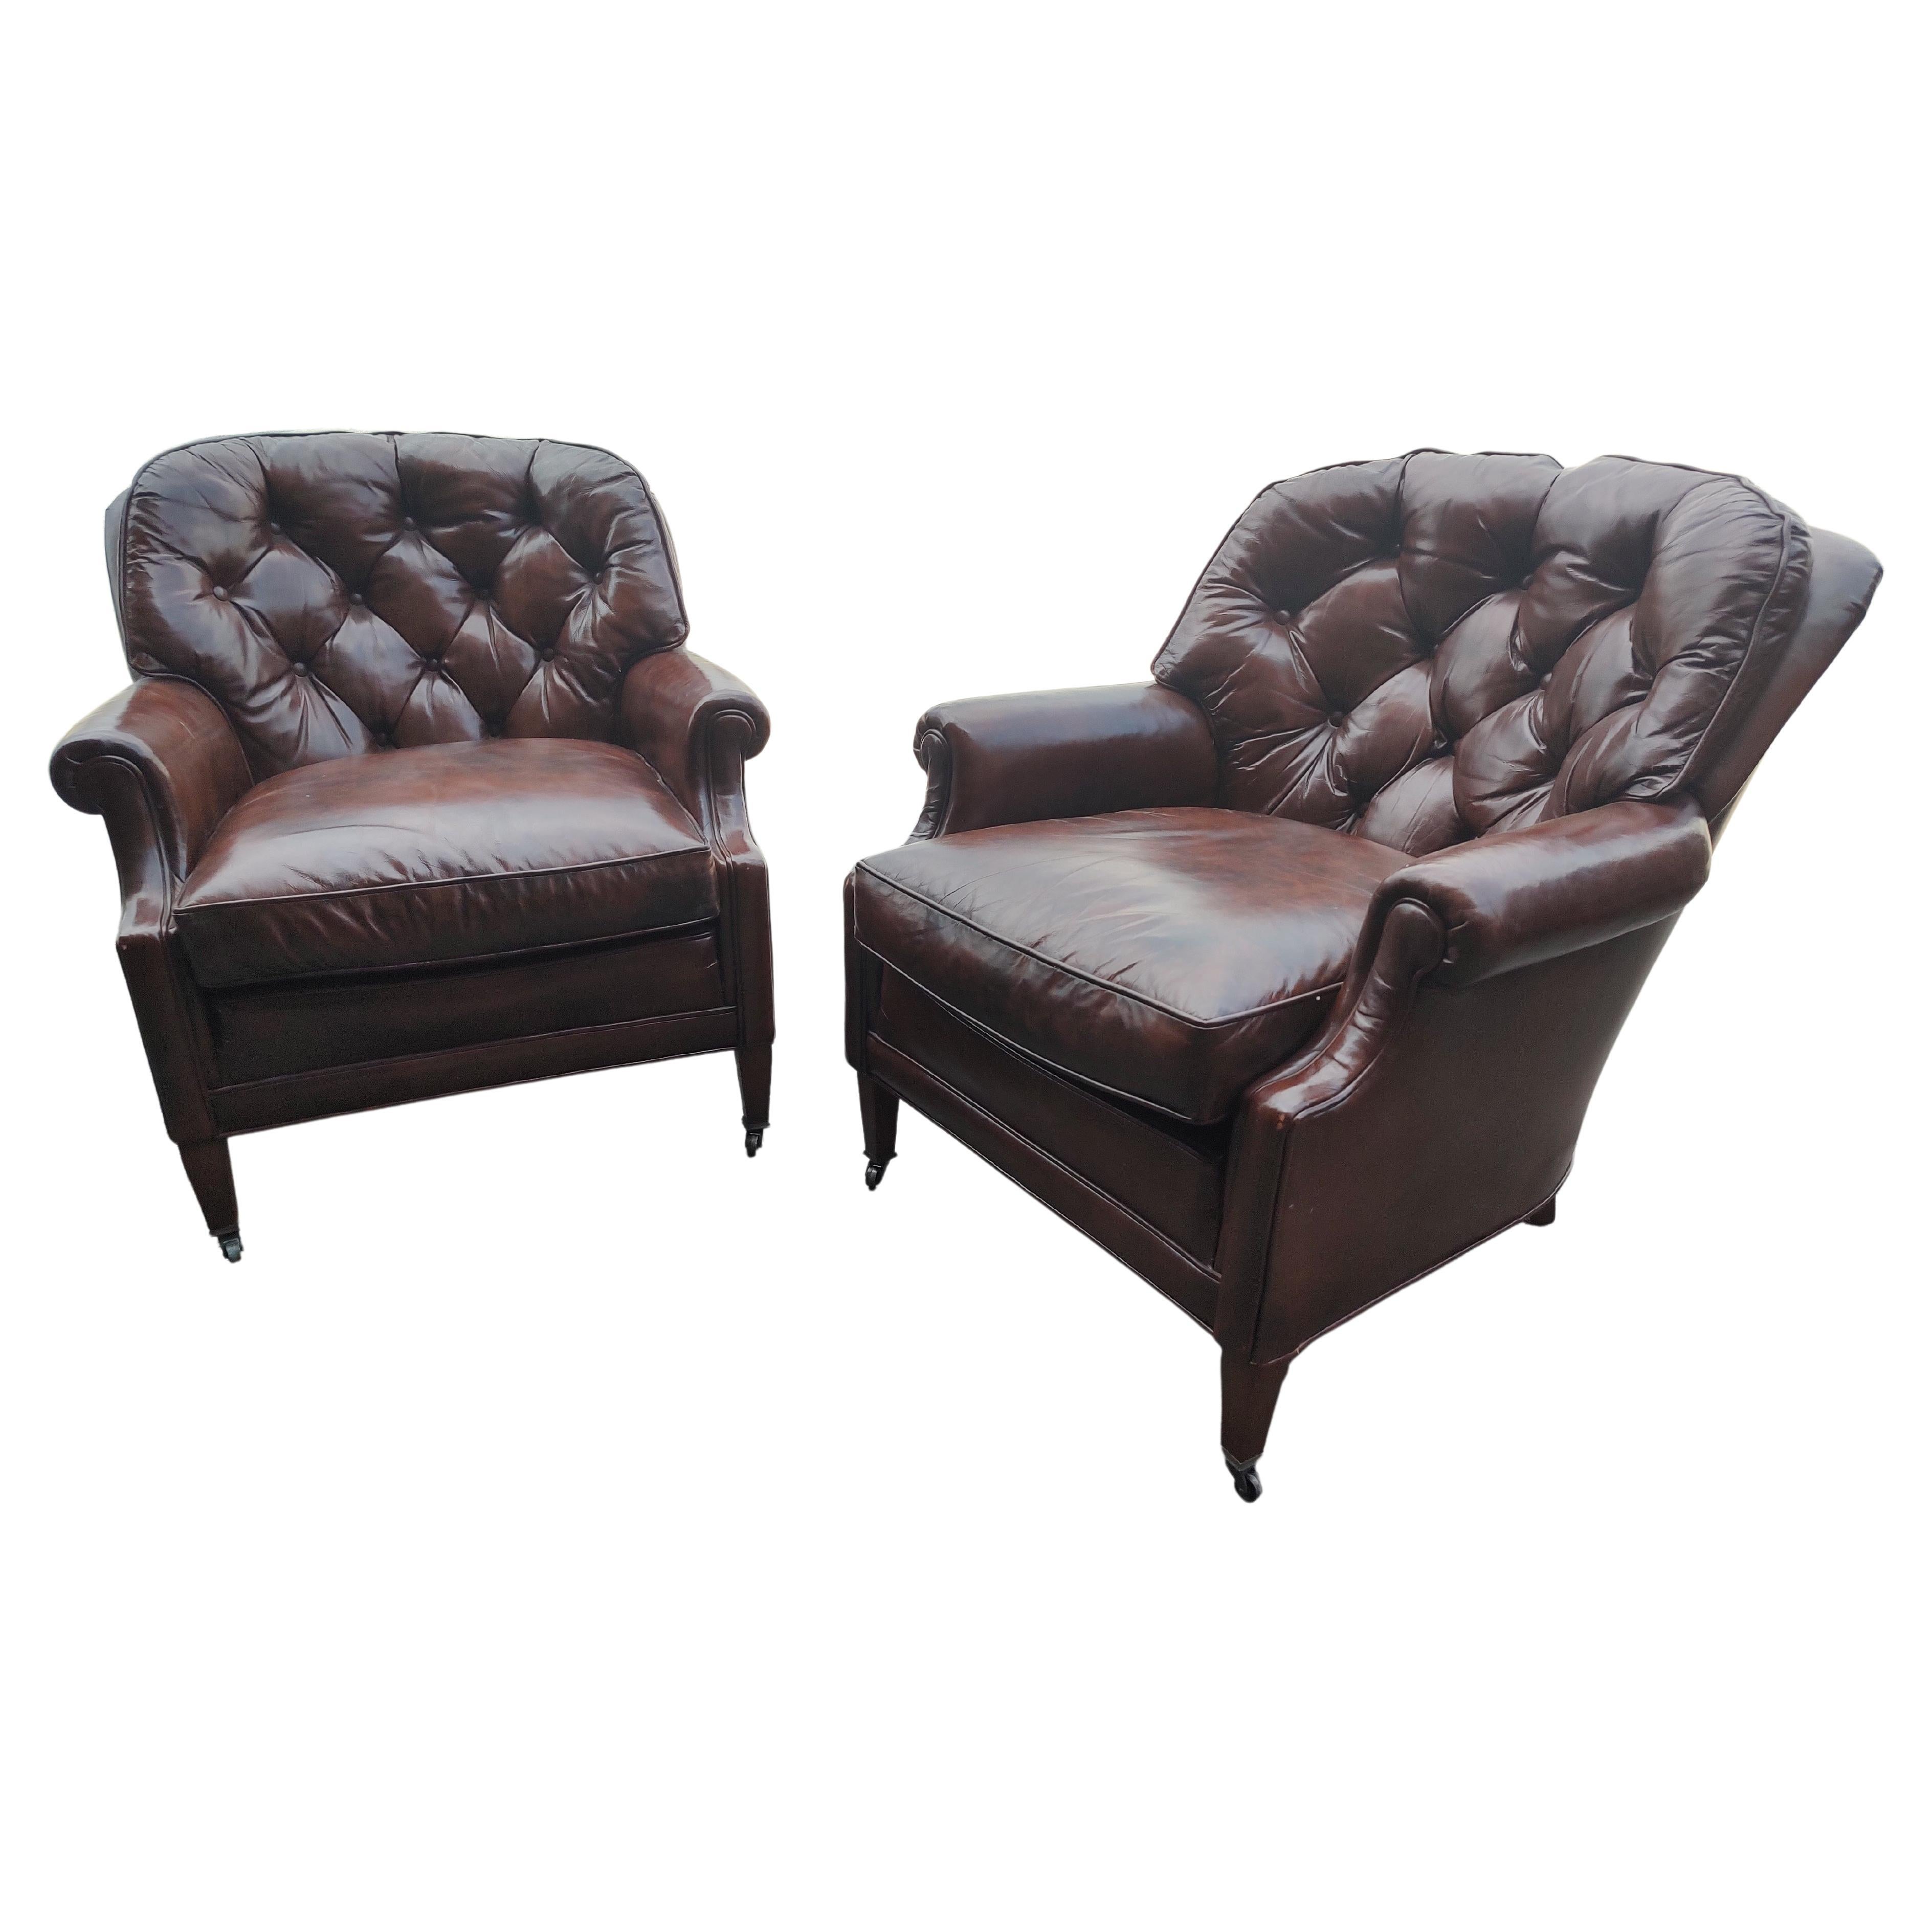 Art Deco Pair of Button Tufted Leather Club Chairs from Bloomingdales Brothers C 1965 For Sale